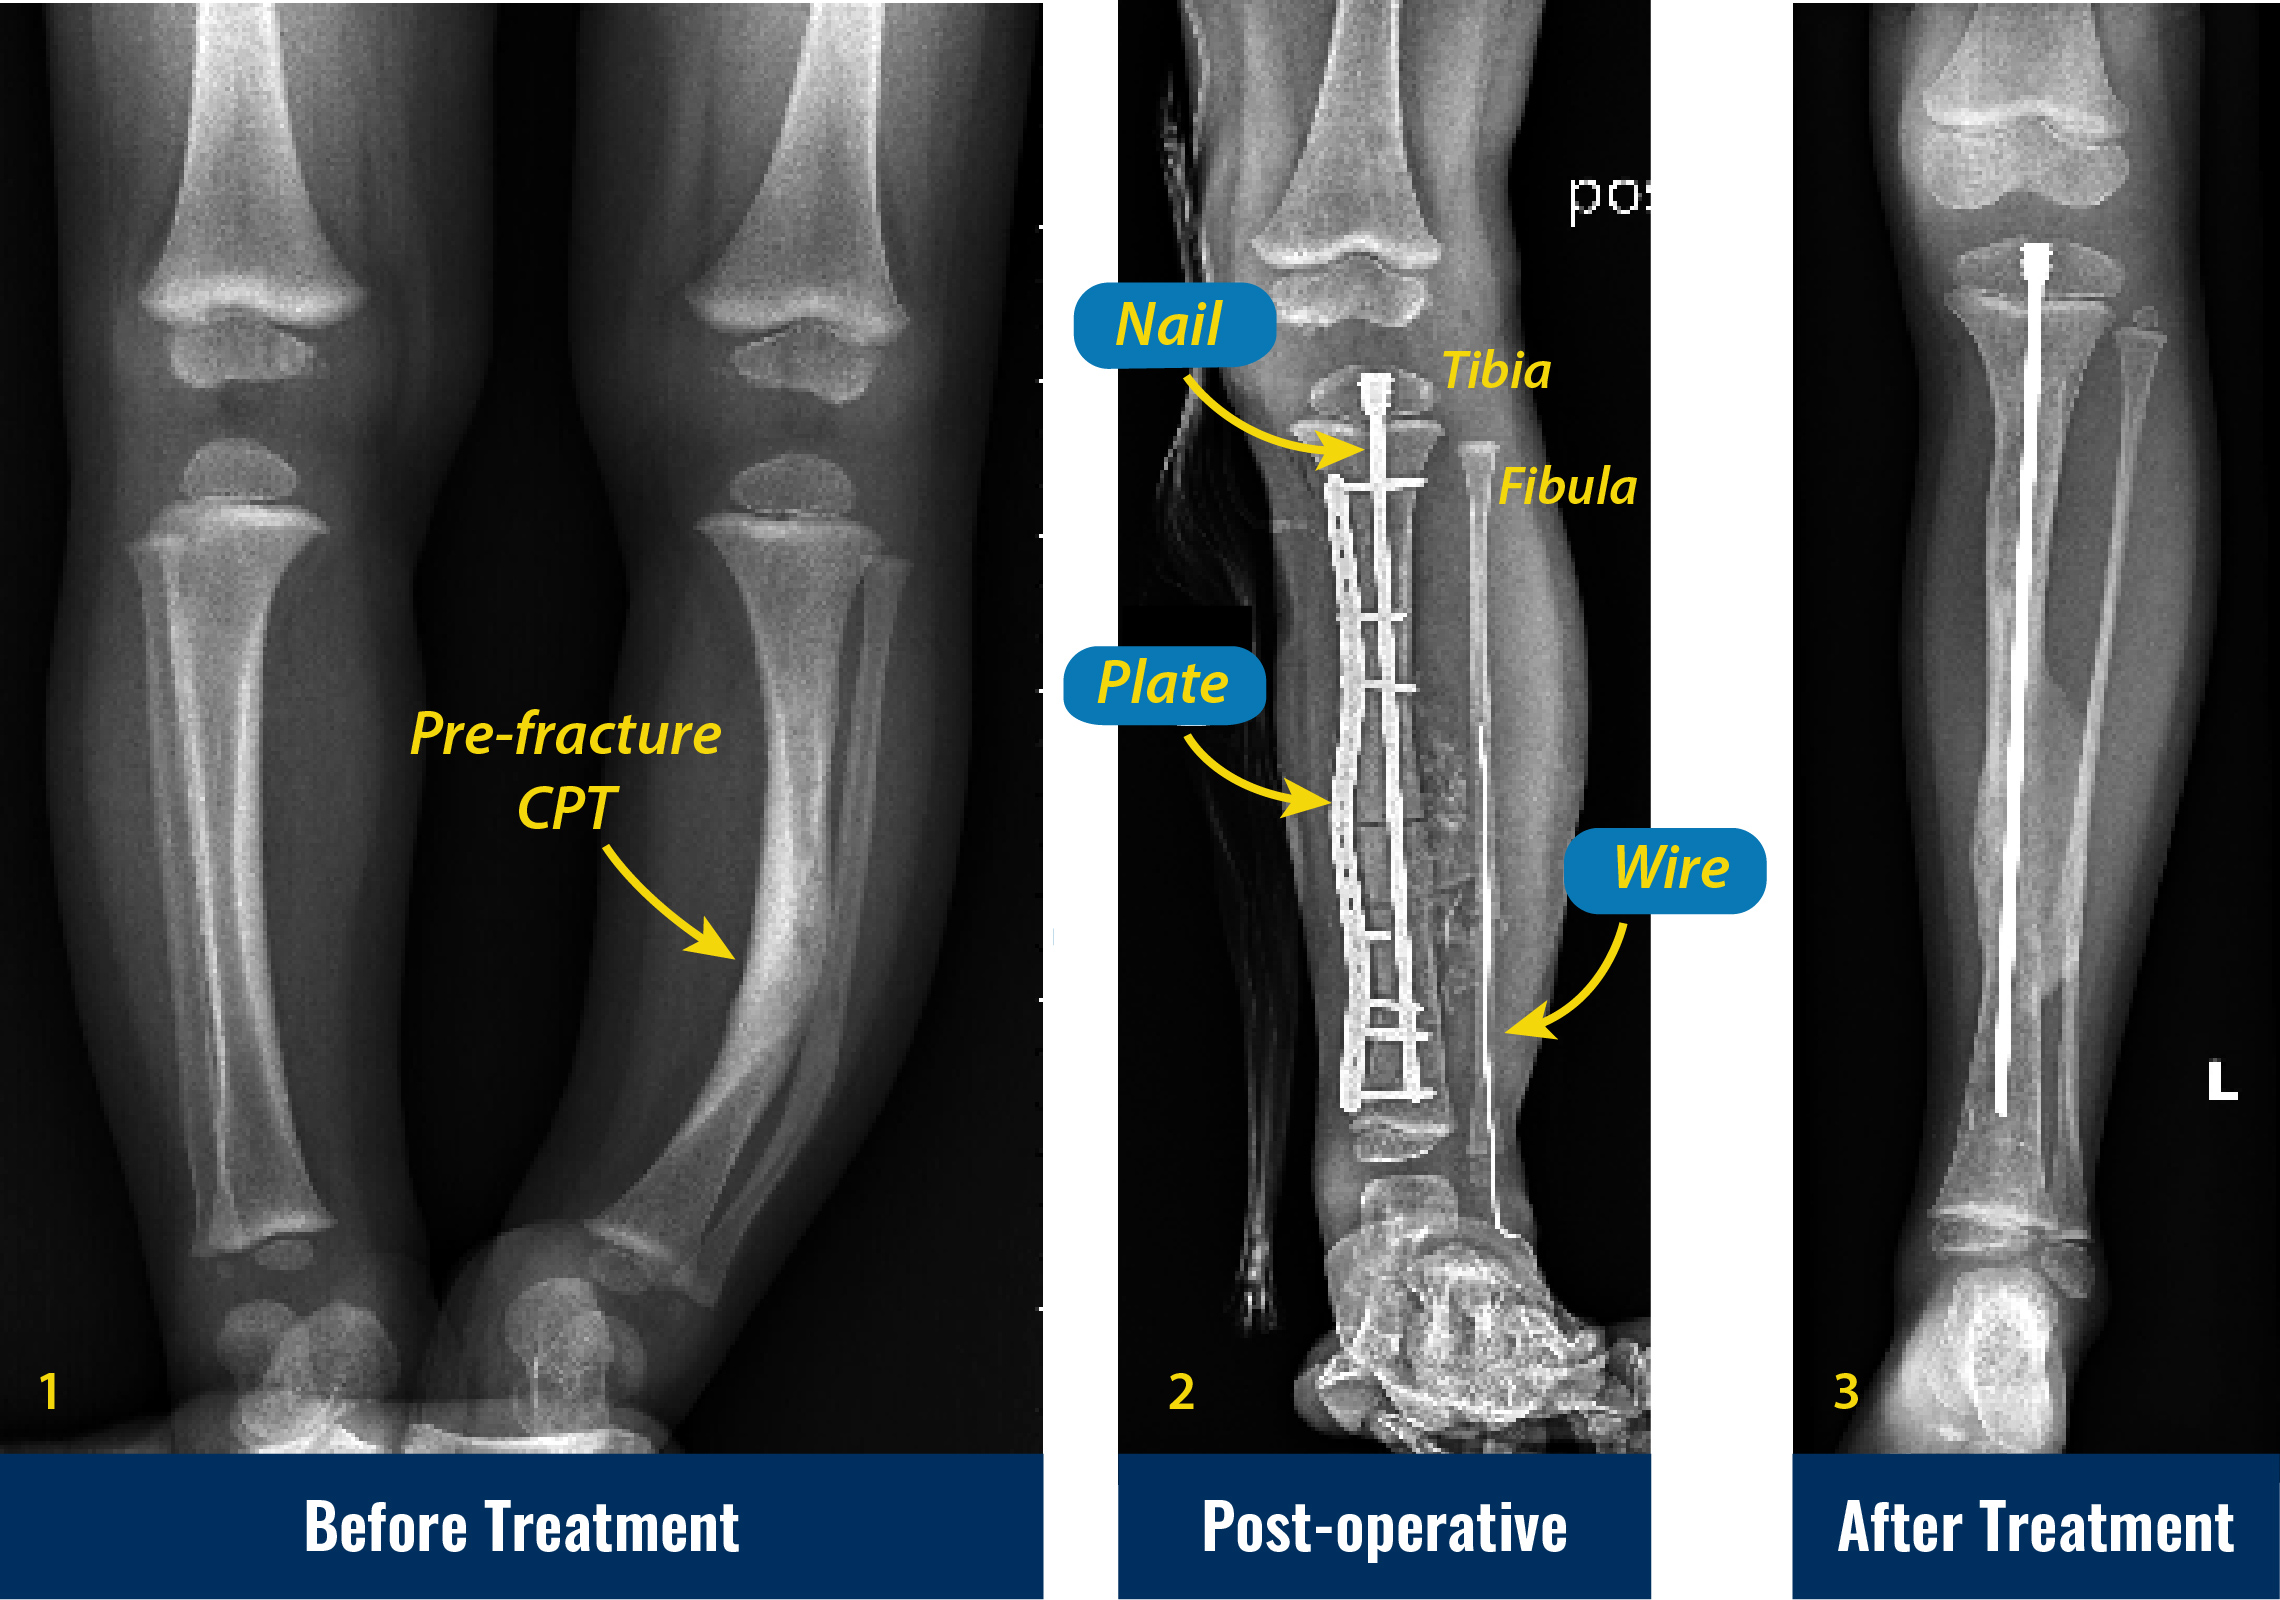 X-rays of “unbroken” congenital pseudarthrosis of the tibia before treatment, after surgery, and after treatment